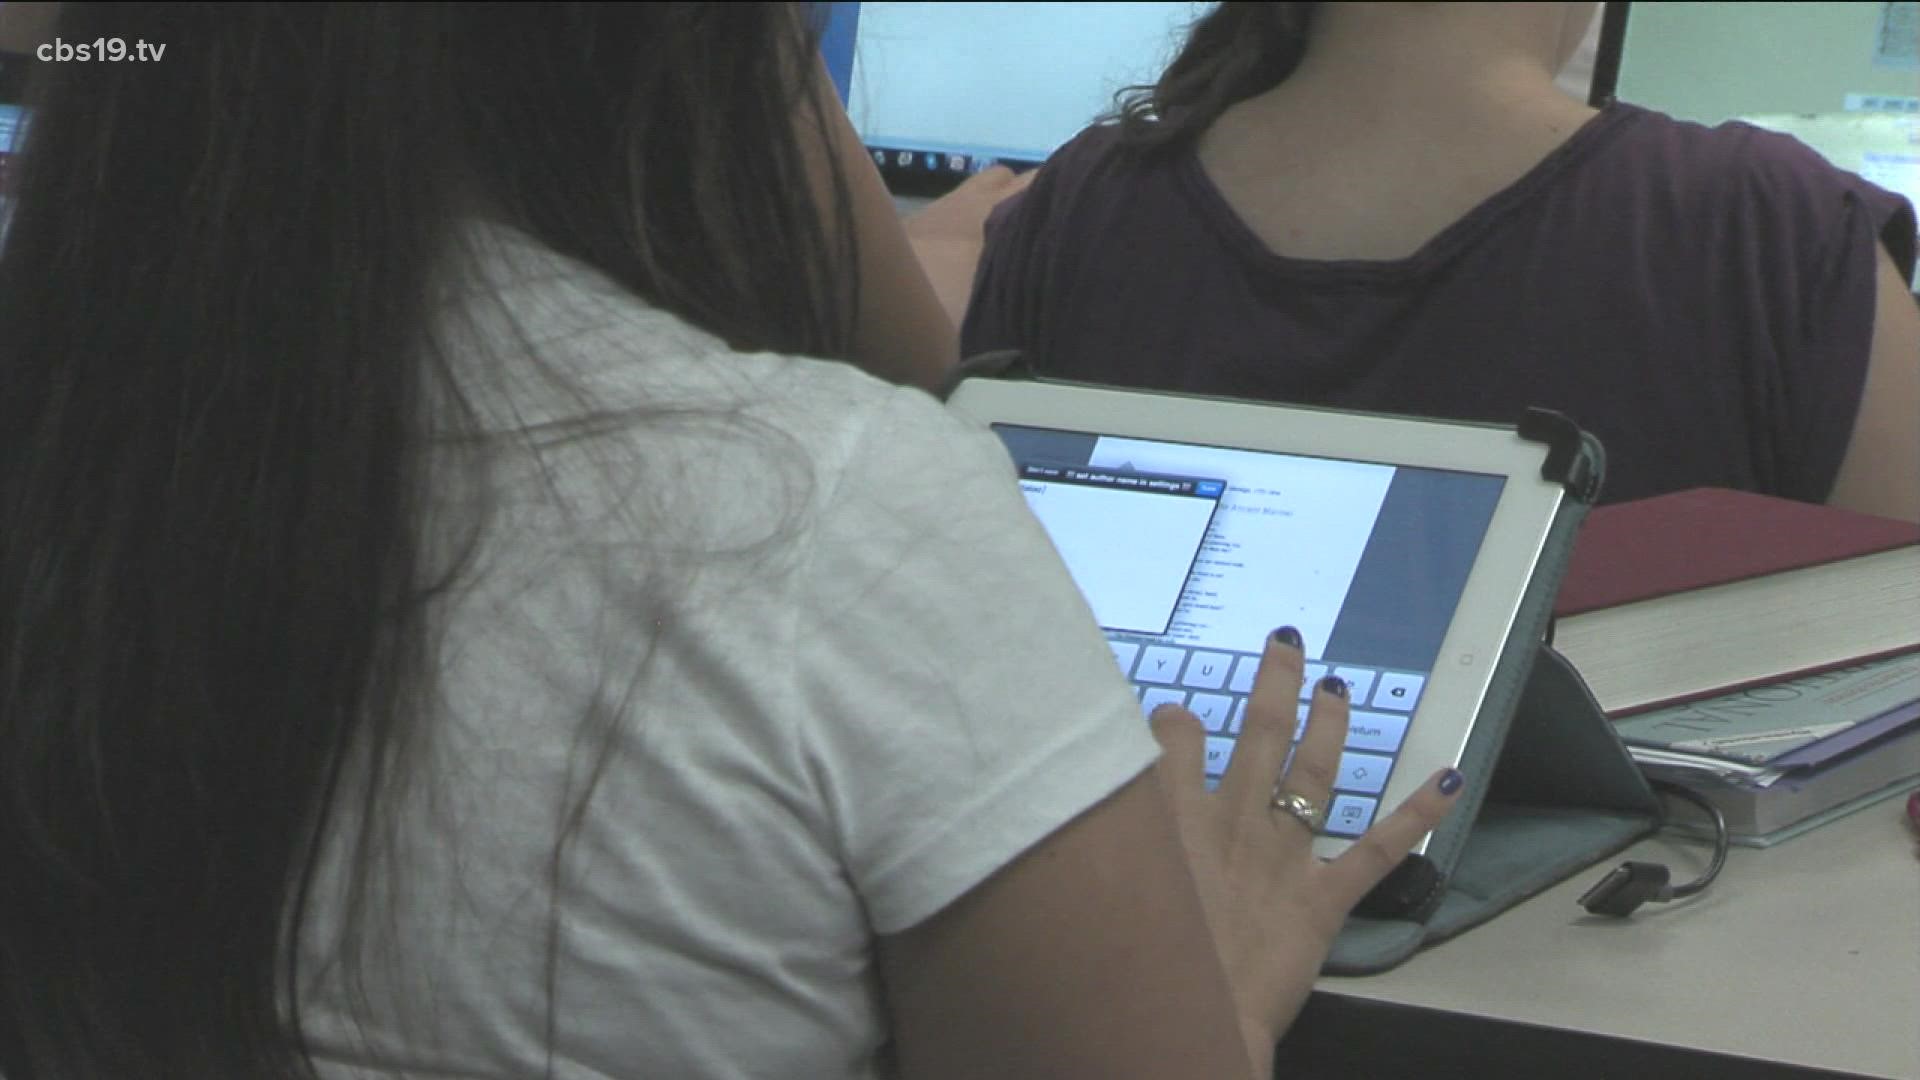 The Longview ISD school district is working with an organization called 'Gaggle' it’s targeted specifically at cyberbullying.